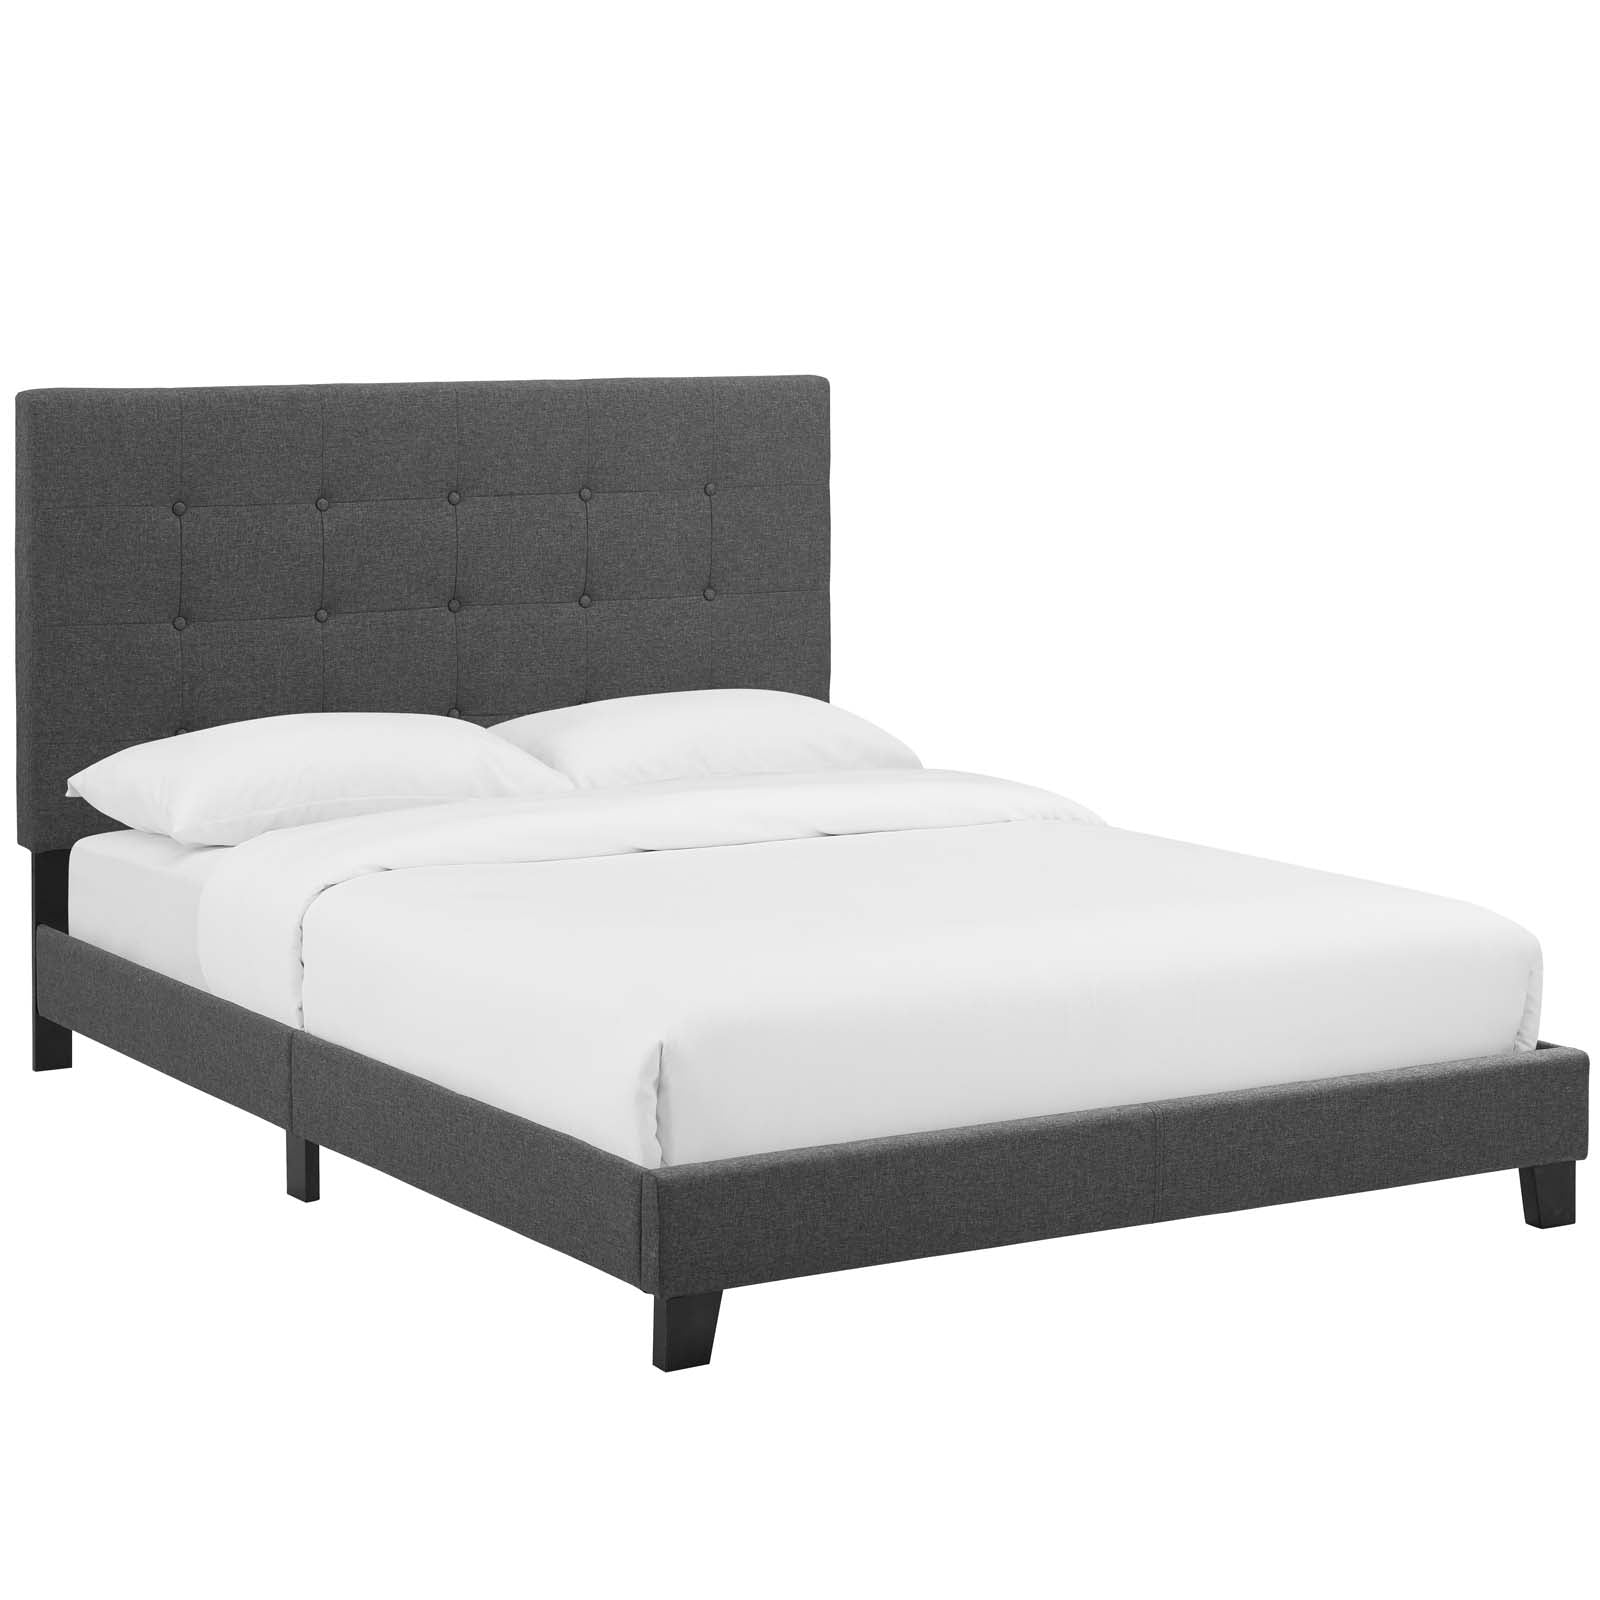 Modway Beds - Melanie Full Tufted Button Upholstered Fabric Platform Bed Gray